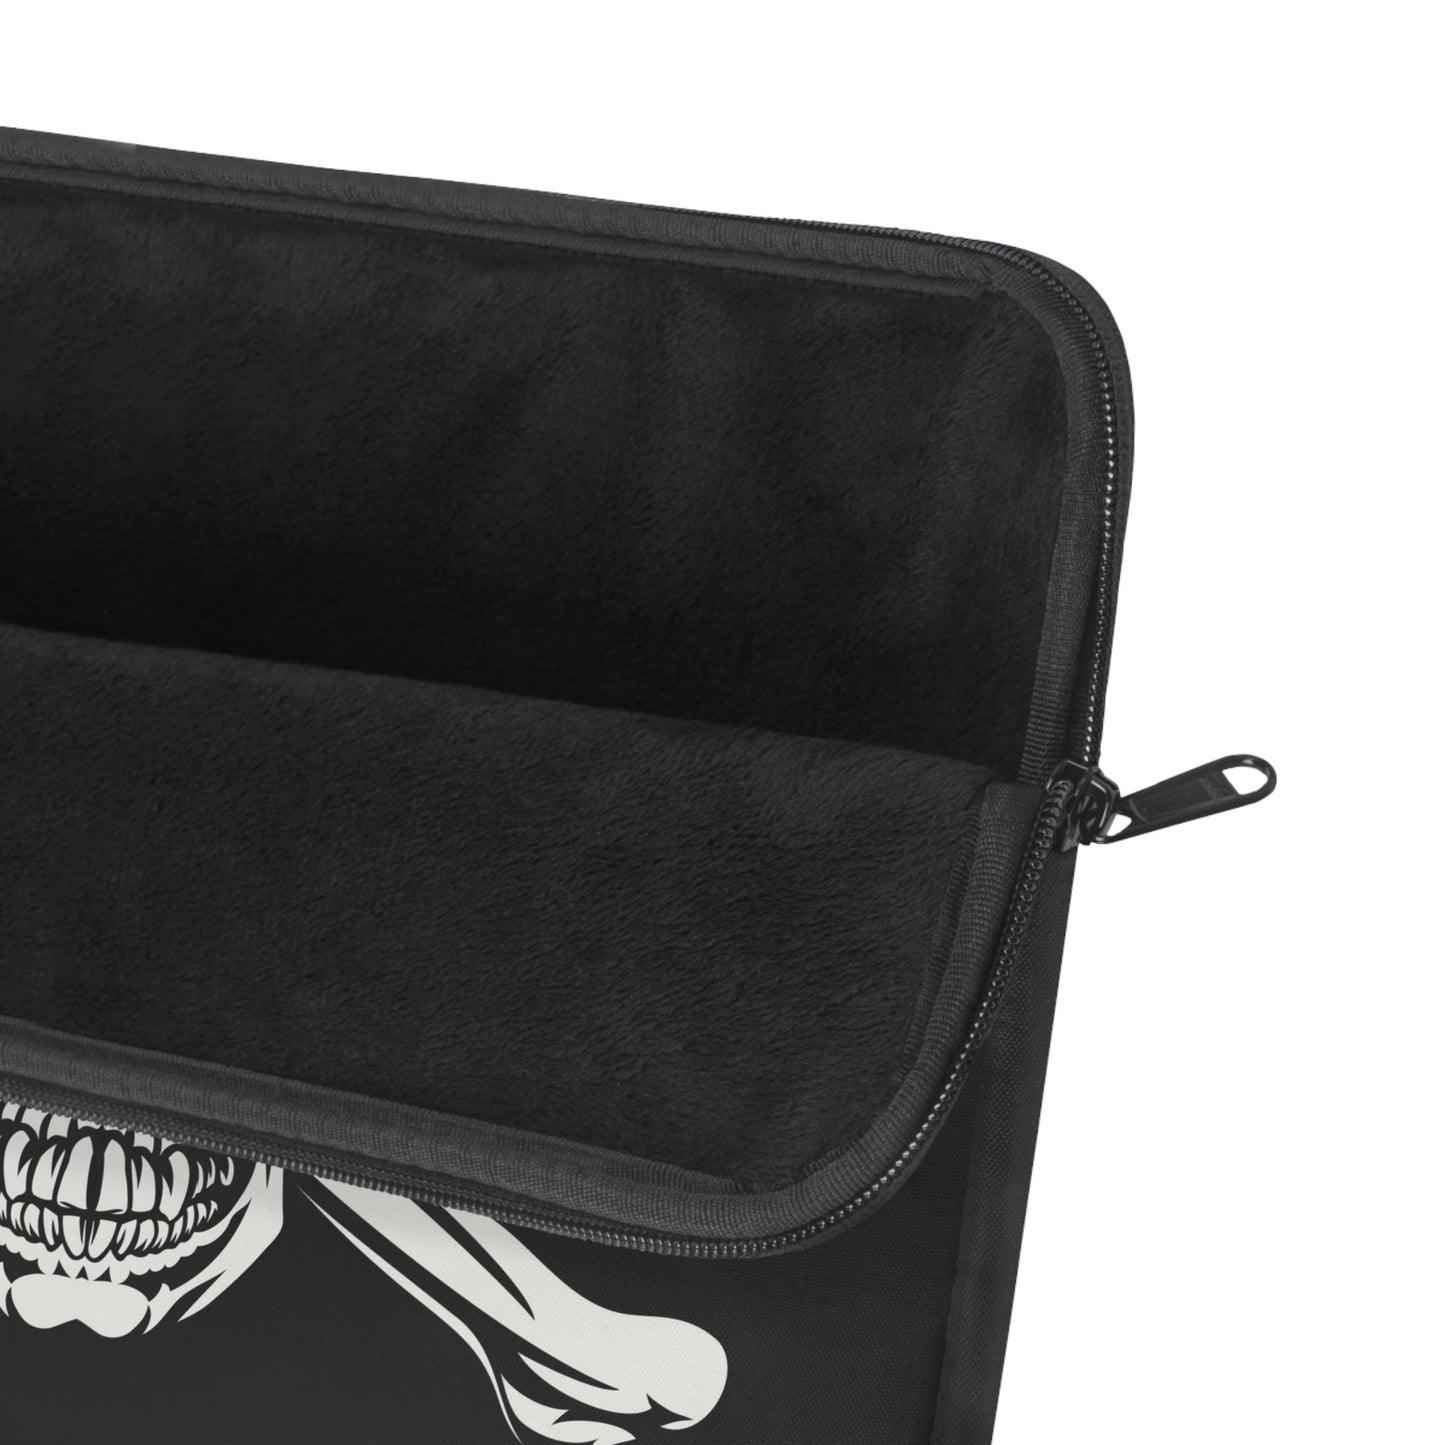 Laptop Sleeve - Classic Pirate Laptop Sleeve and Tablet Sleeve. Comes In 3 Sizes